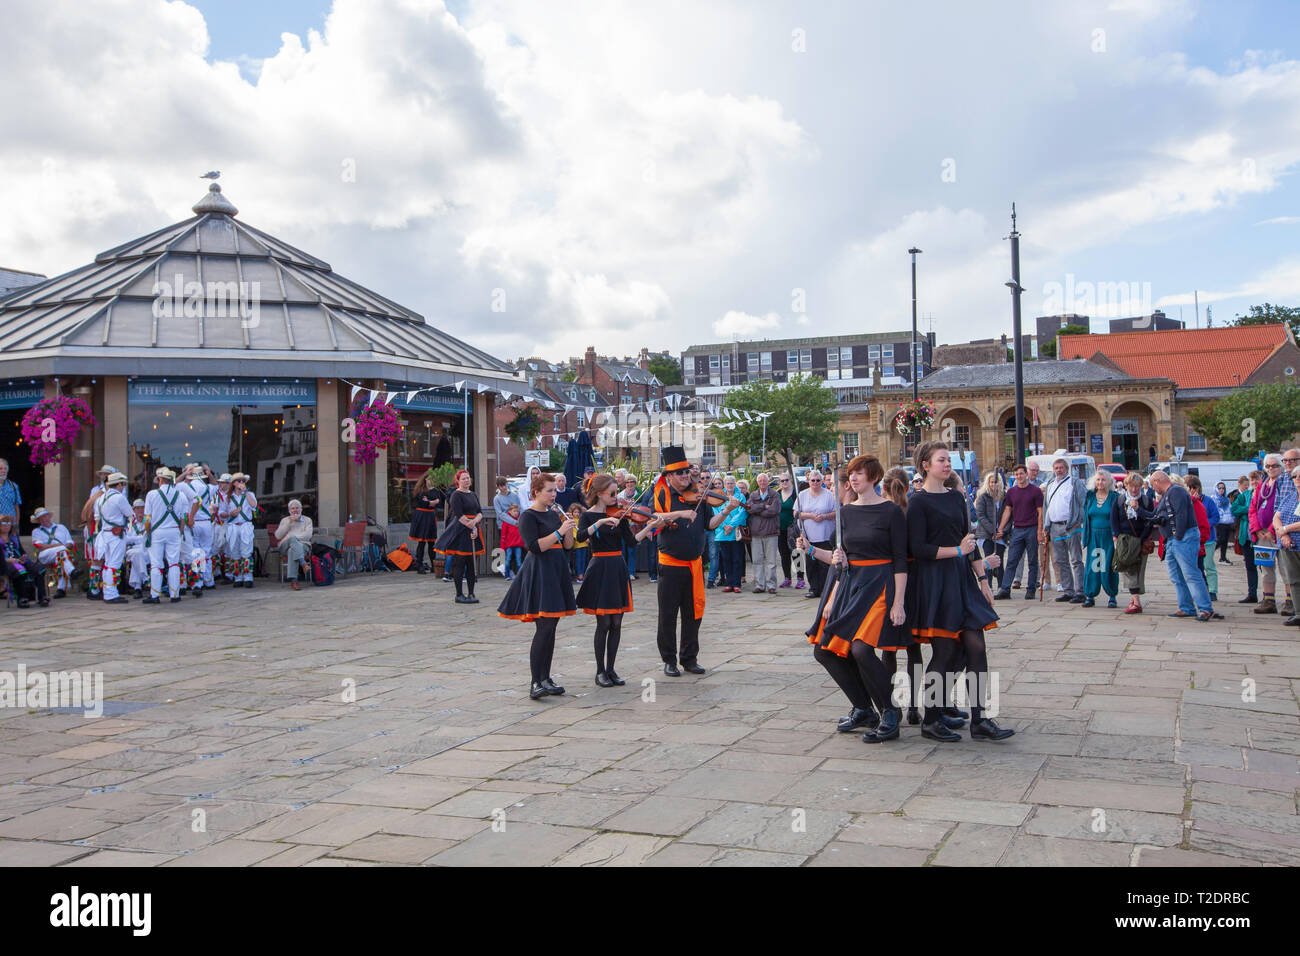 celebrations and dancing on the streets at Whitby Folk week 2018, North Yorkshire coast, England Stock Photo